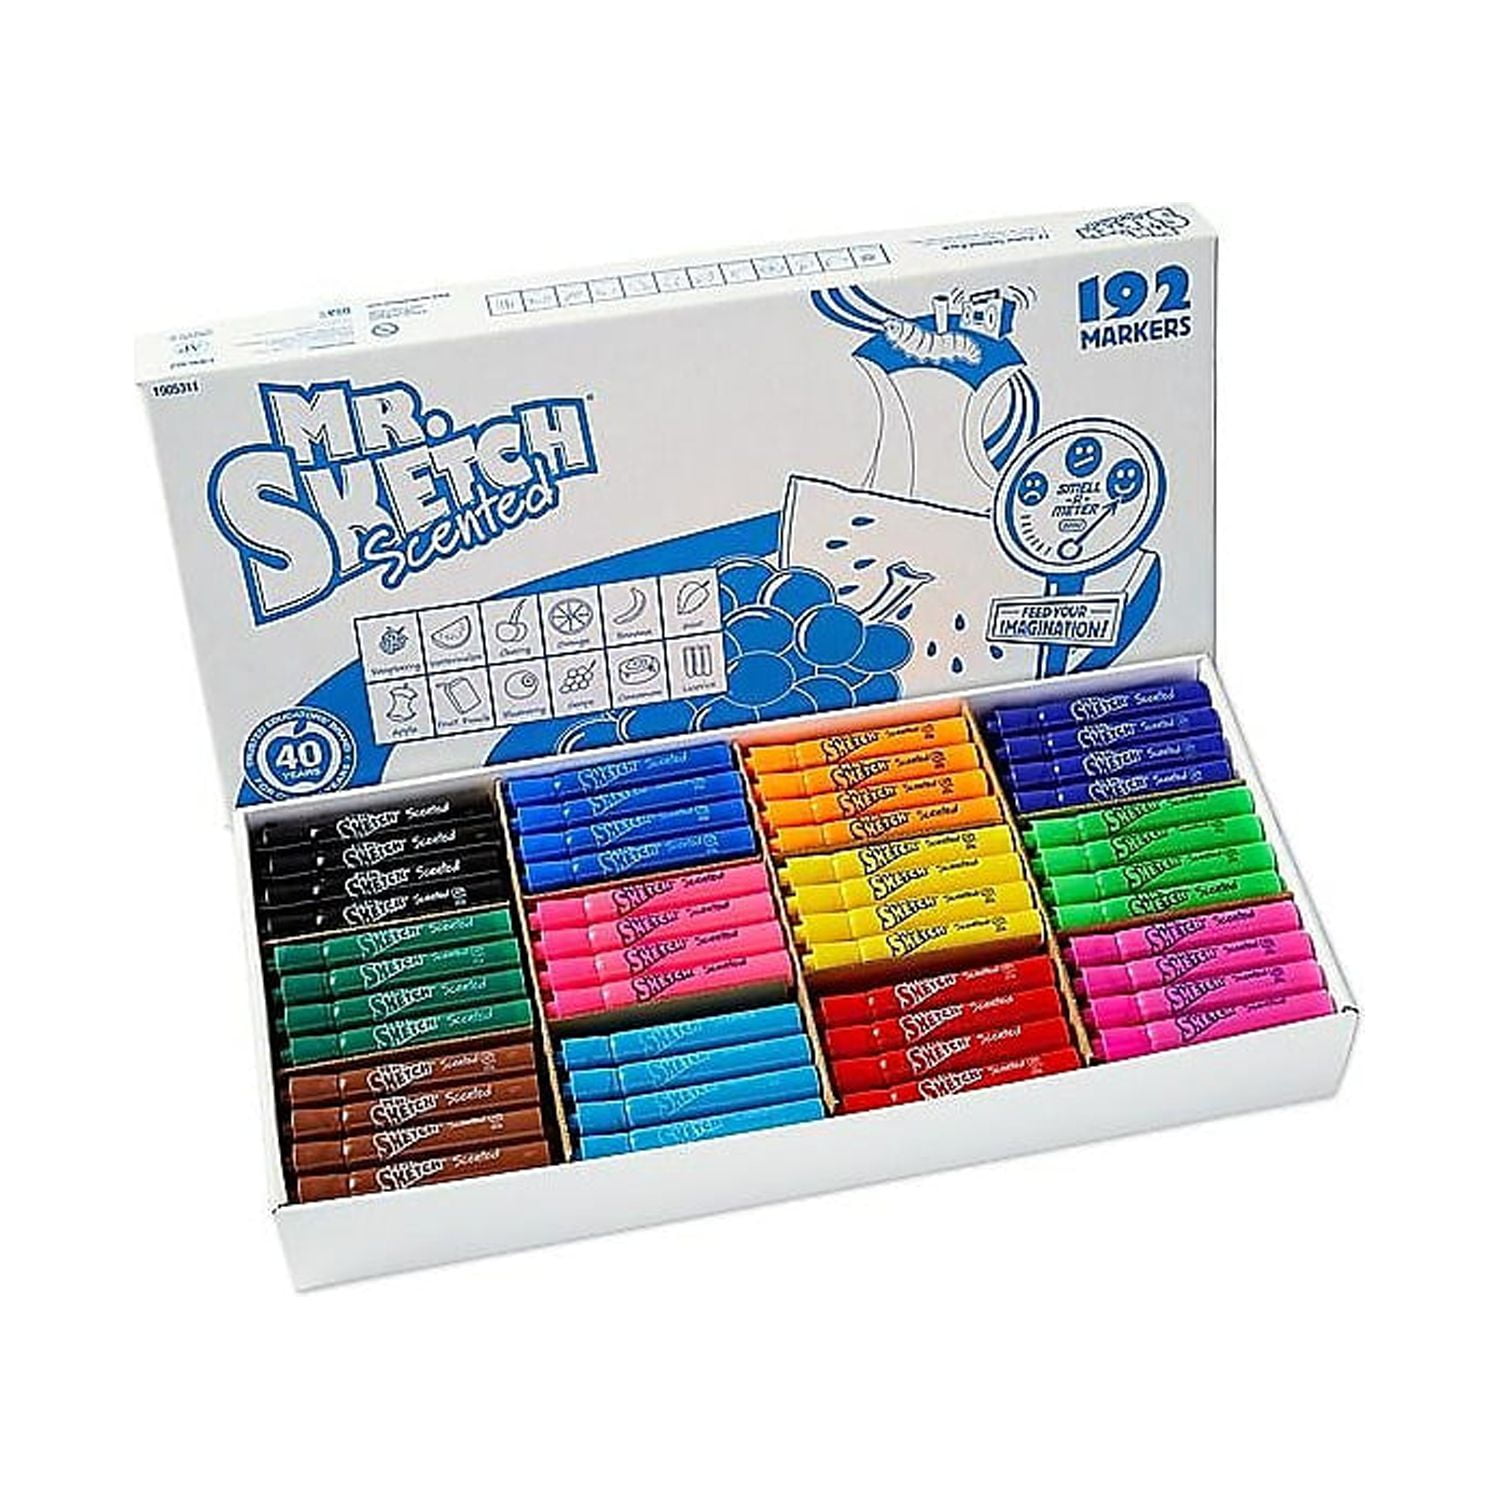 Mr Sketch Scented Water Based Markers Chisel 1905311 bd11b330 d257 4790 a778 d0b825a0fc3a.fcd317f9a44ff6b2e766c6f6fdb732ed